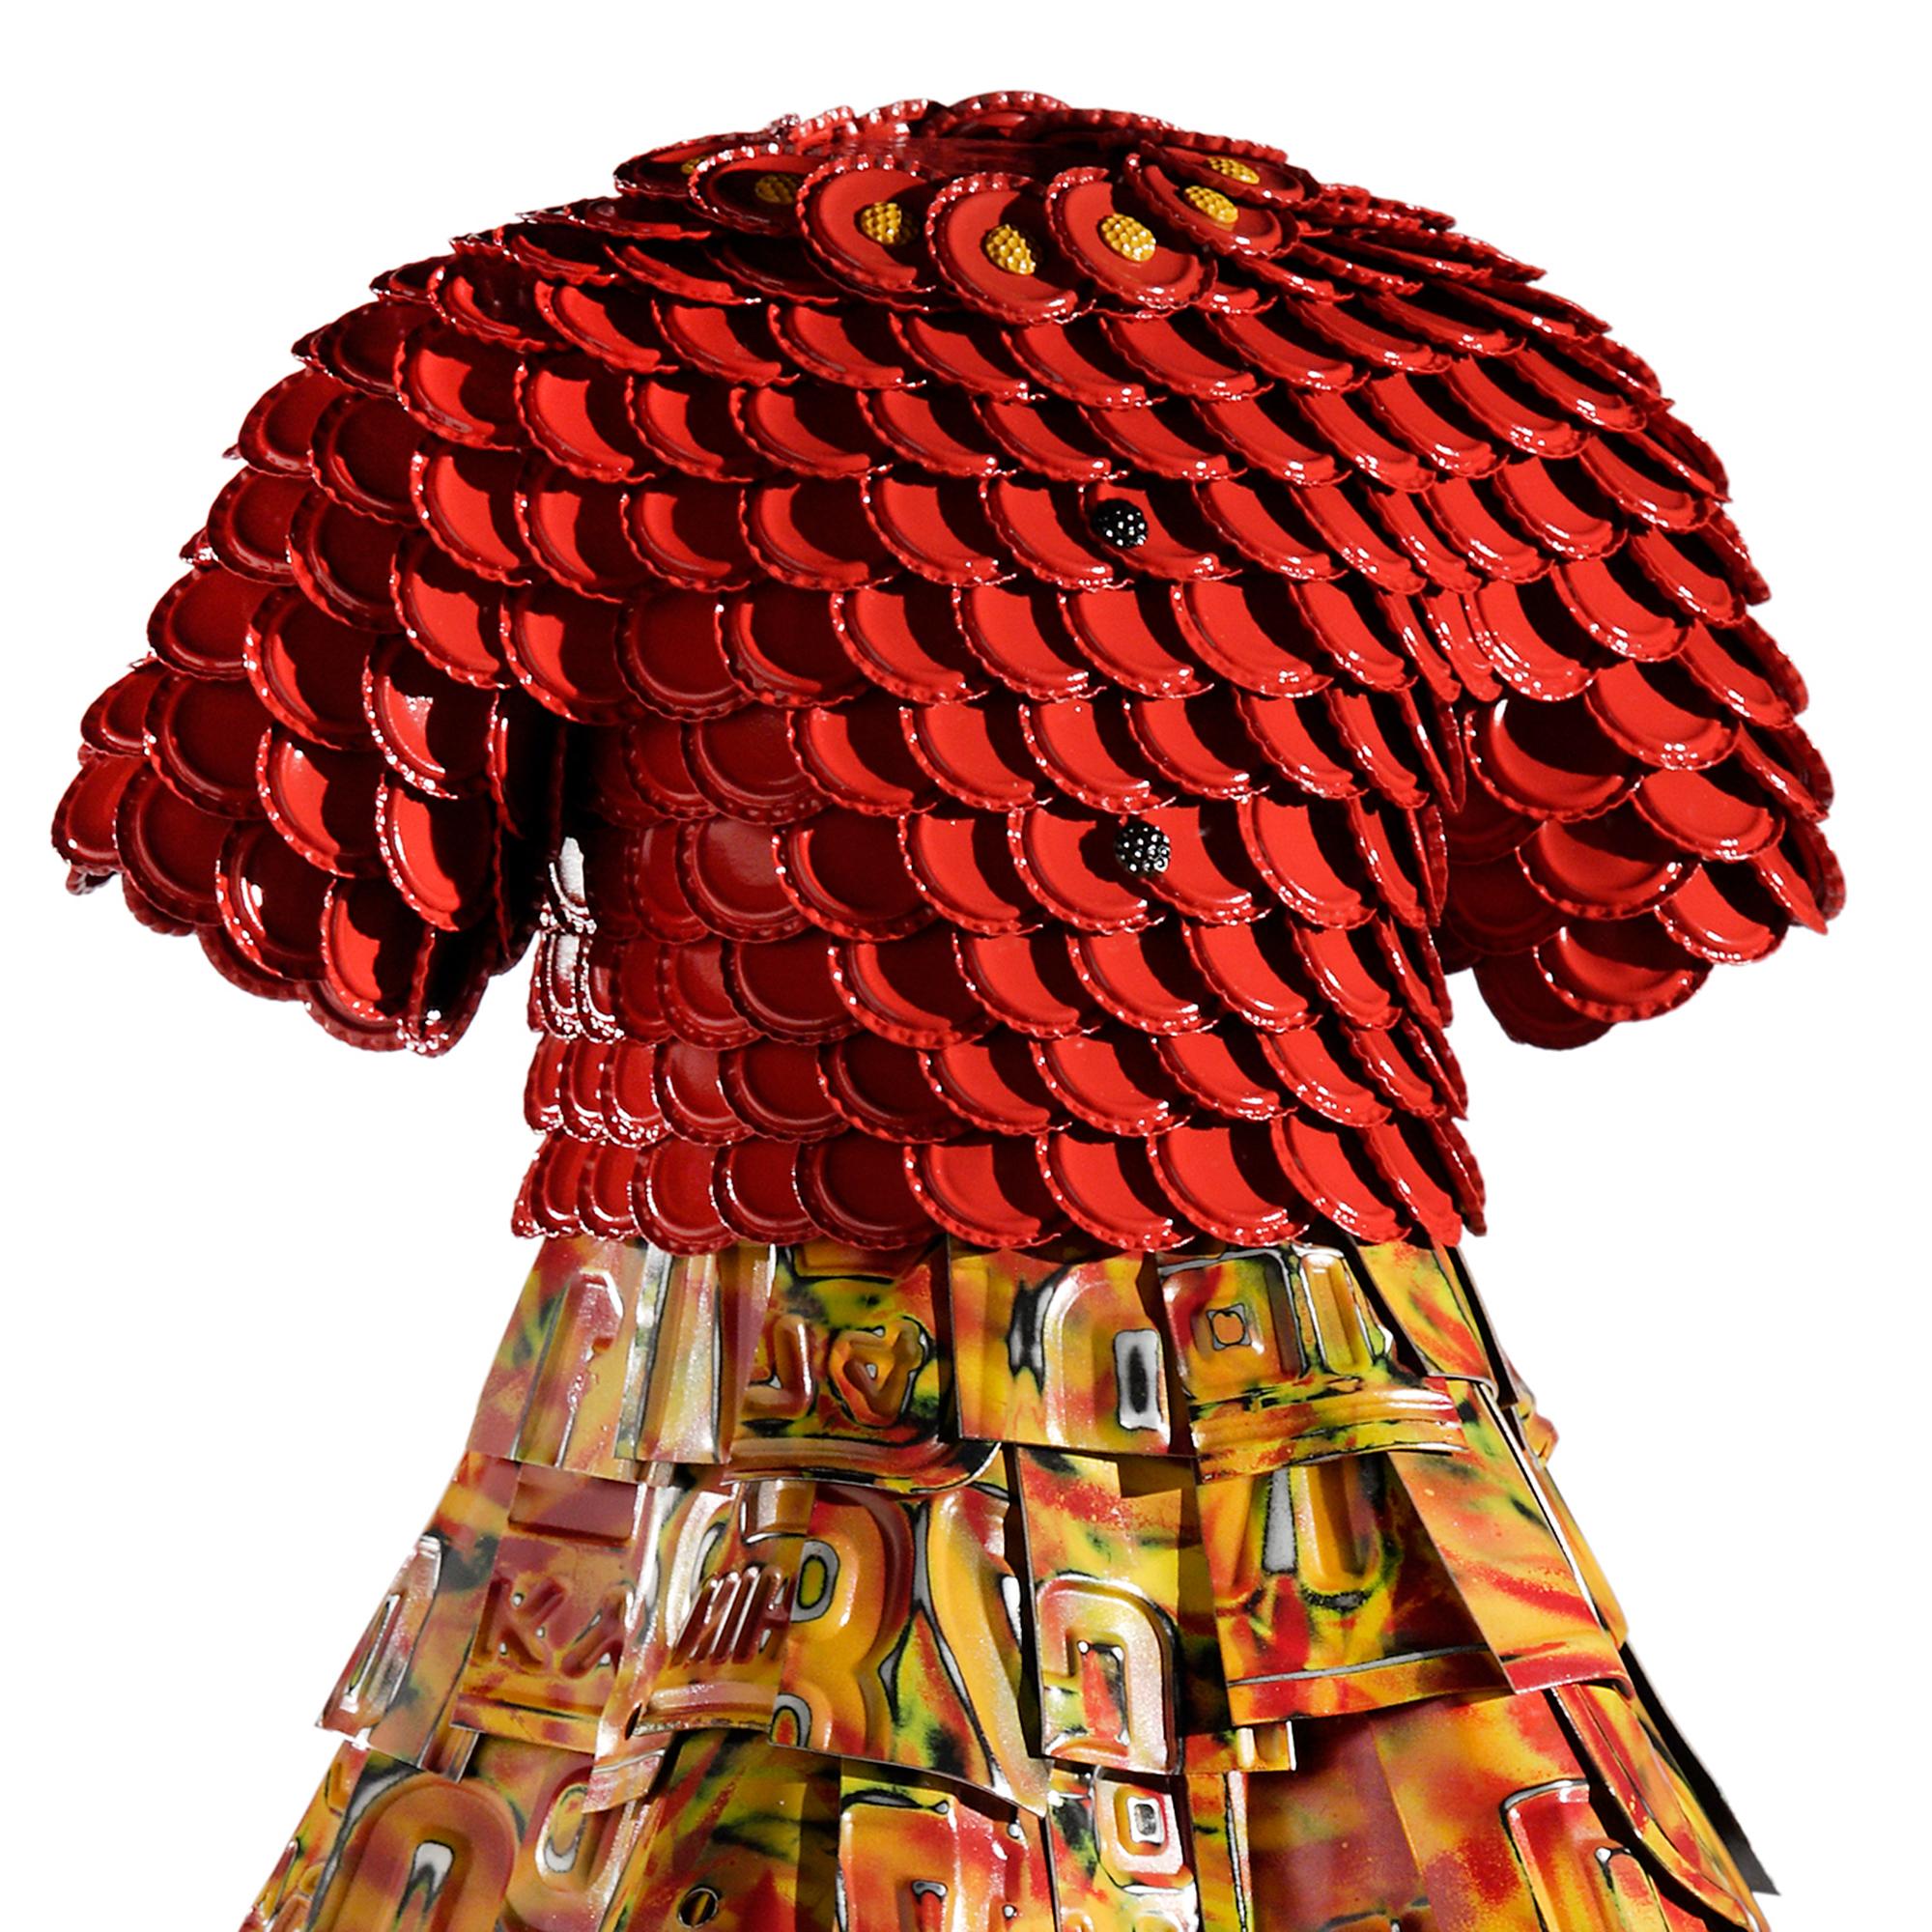 'Harper' Mixed Media, Found Object Sculpture of a Red and Orange Dress